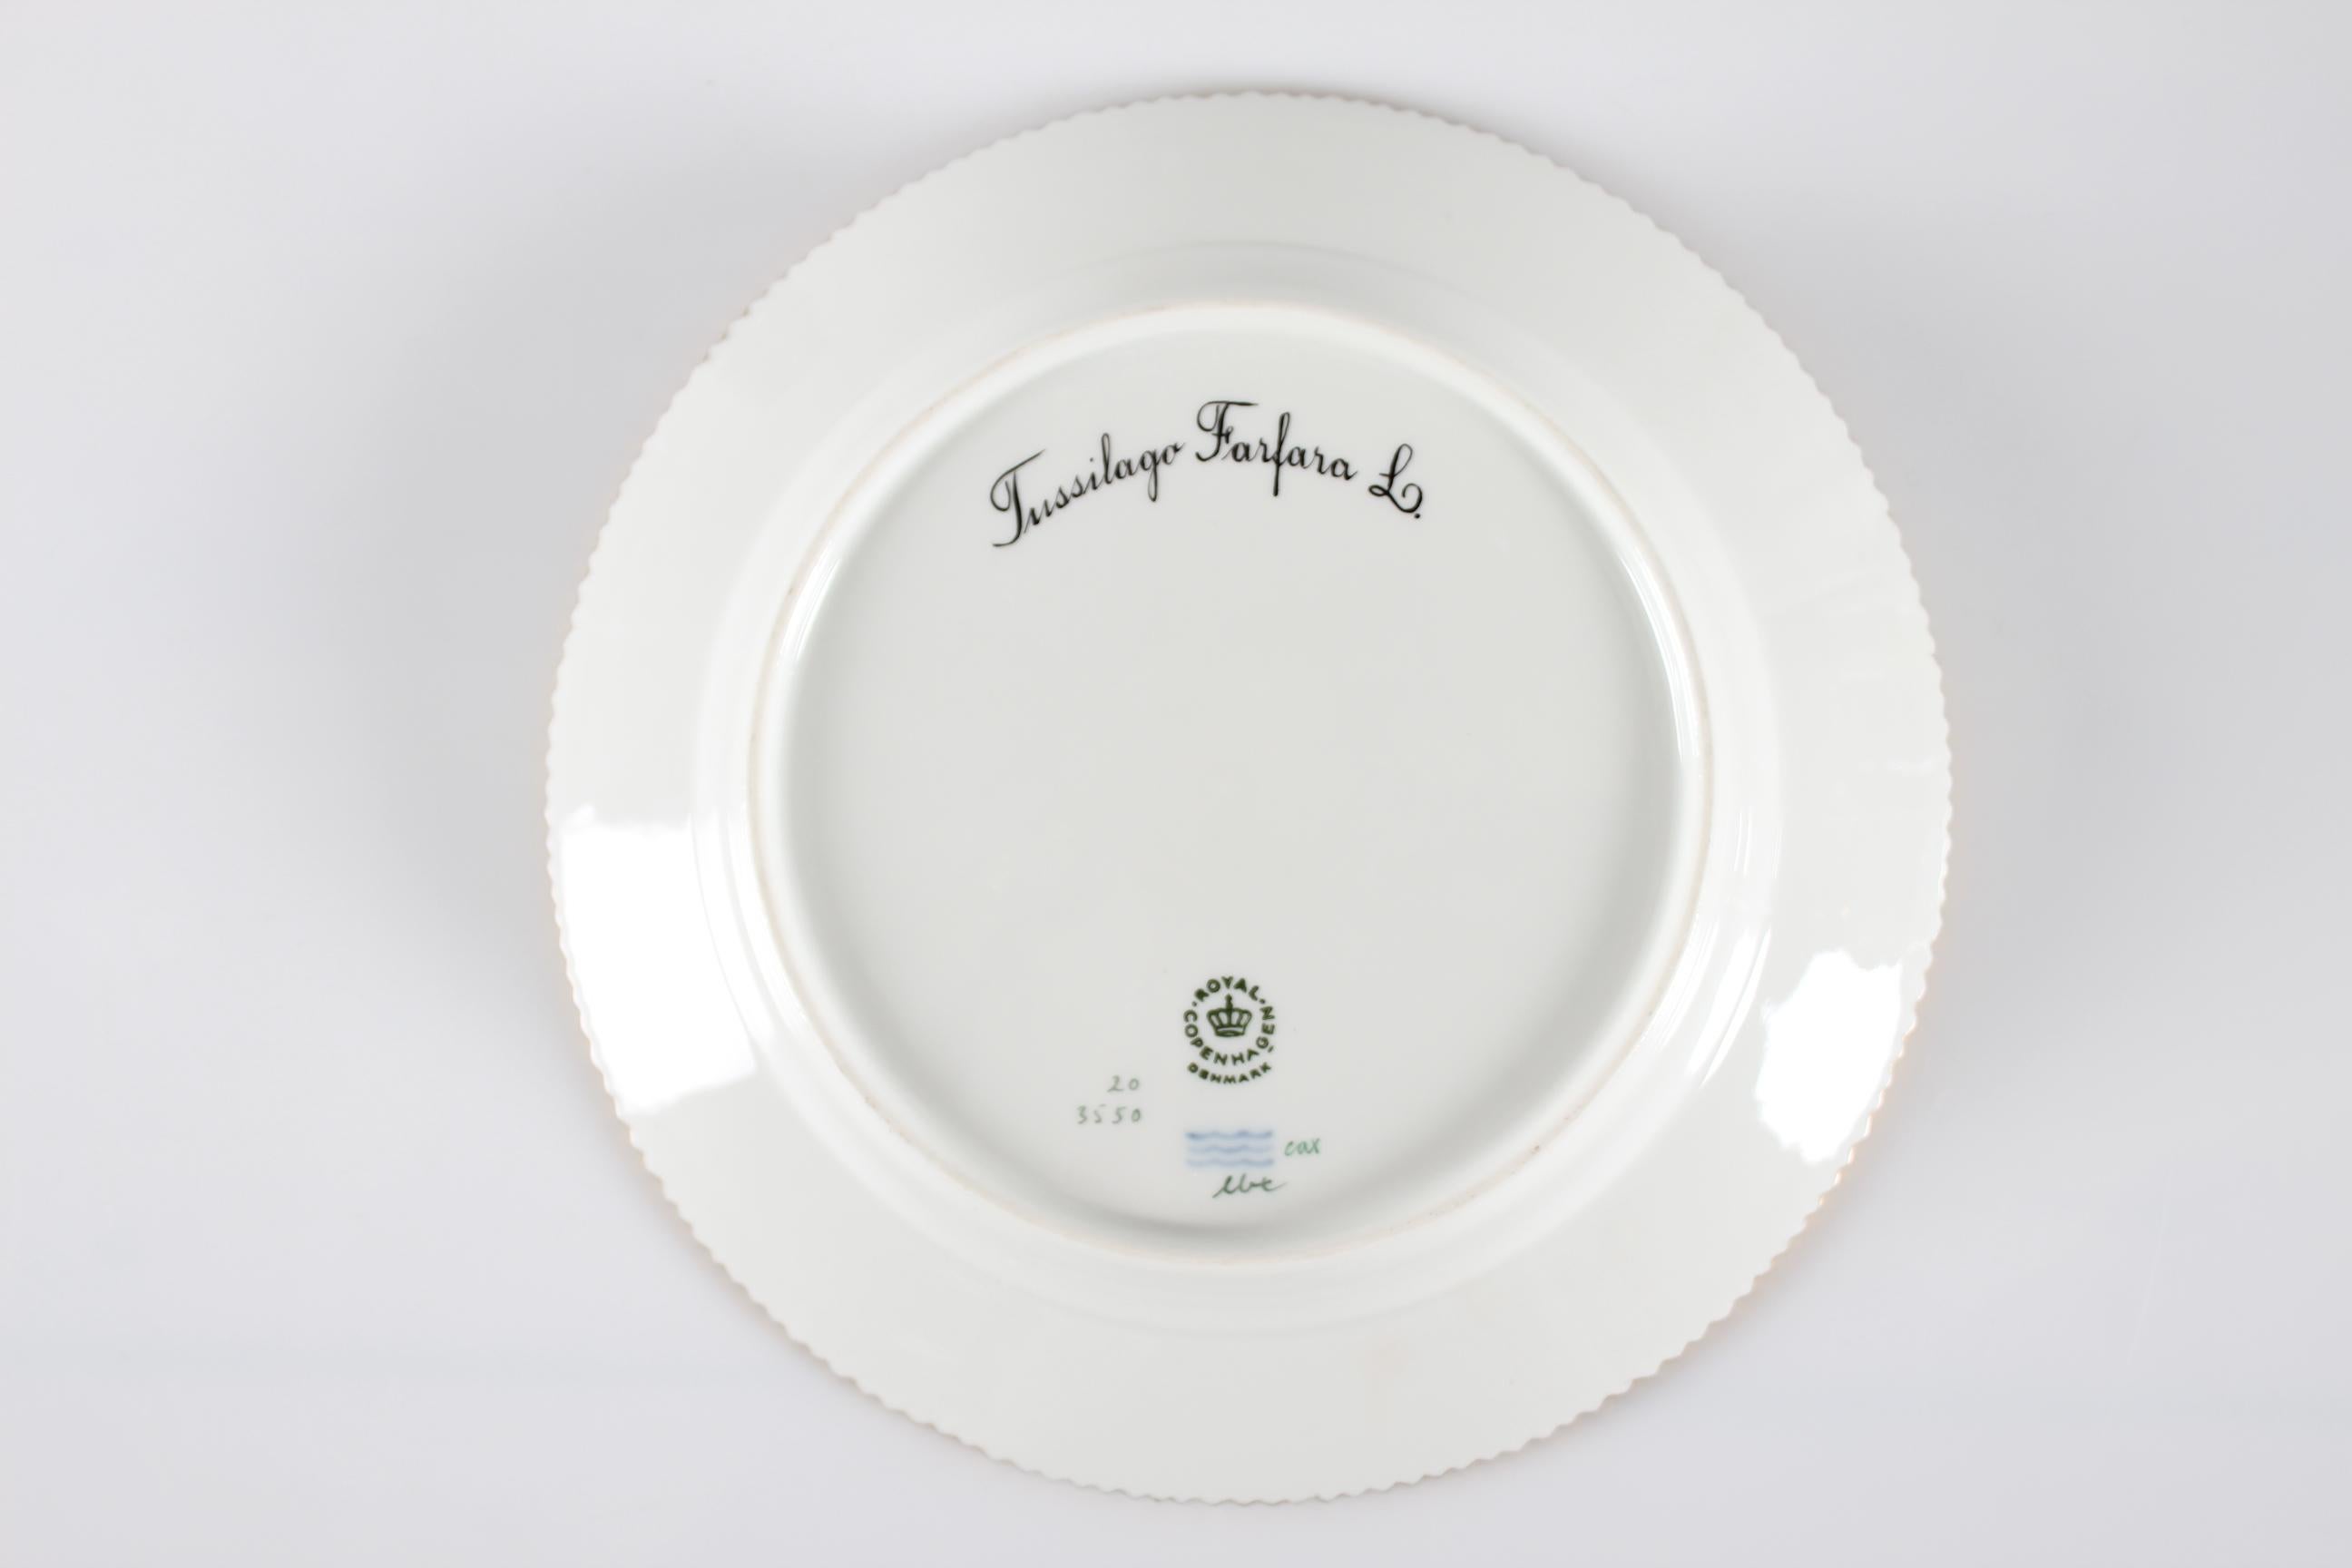 Royal Copenhagen Flora Danica porcelain hand painted in Denmark

Round dish or lunch plate model number 20/3550.
With production stamp from the period 1969-74 and decorated with flower in latin name: Tussilago Farfara L. 

Measure: Diameter